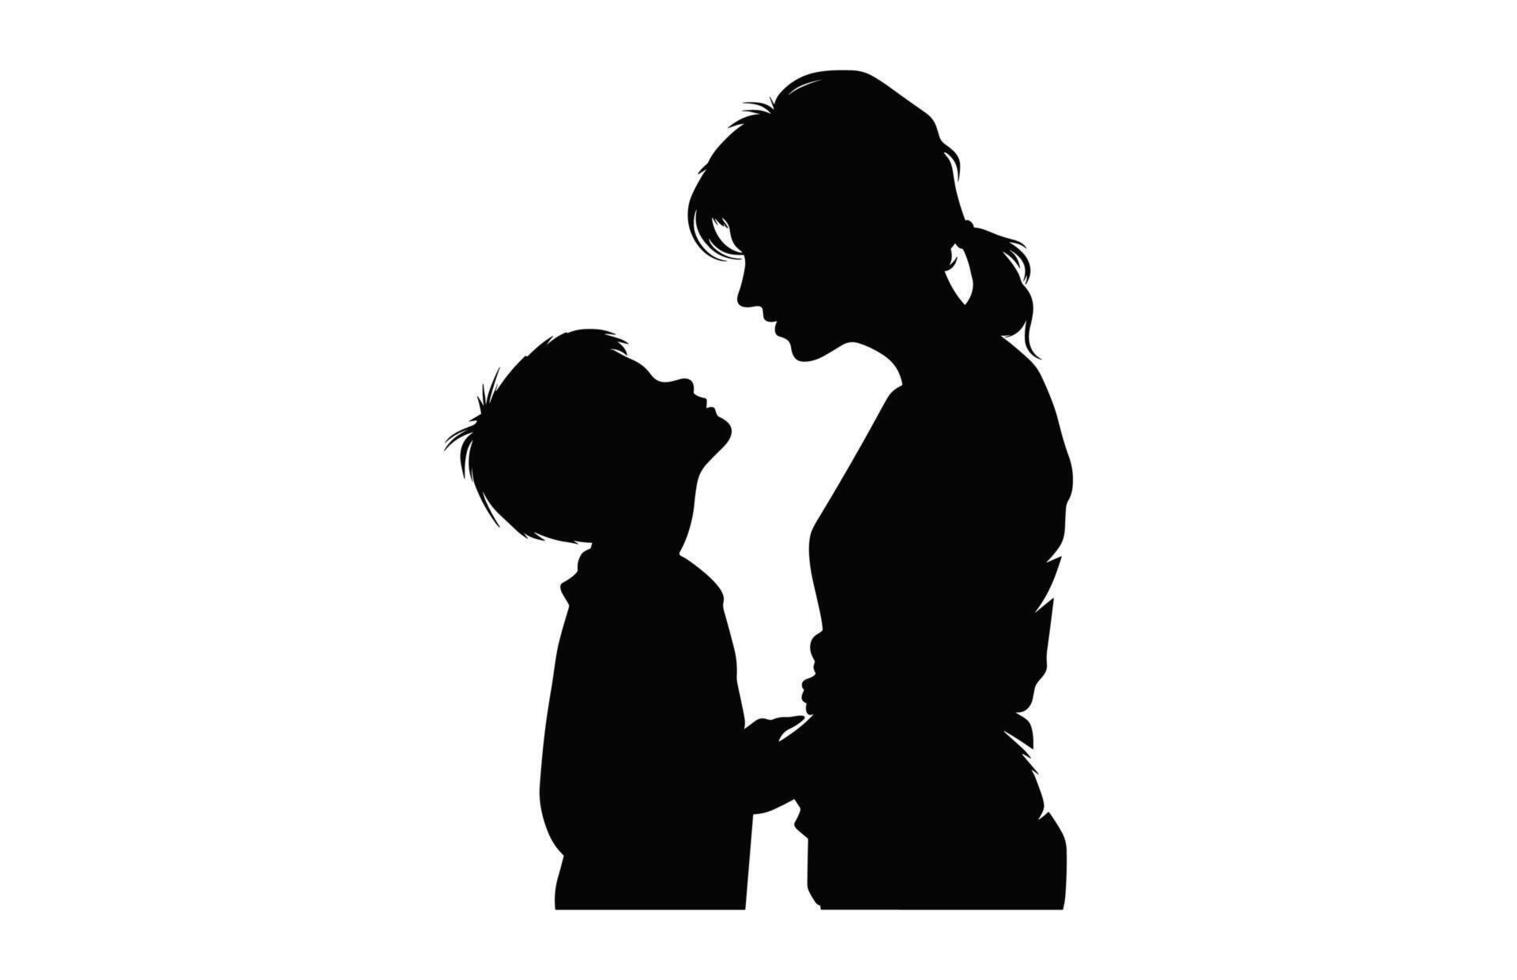 Mother and Child Silhouette isolated on a white background vector